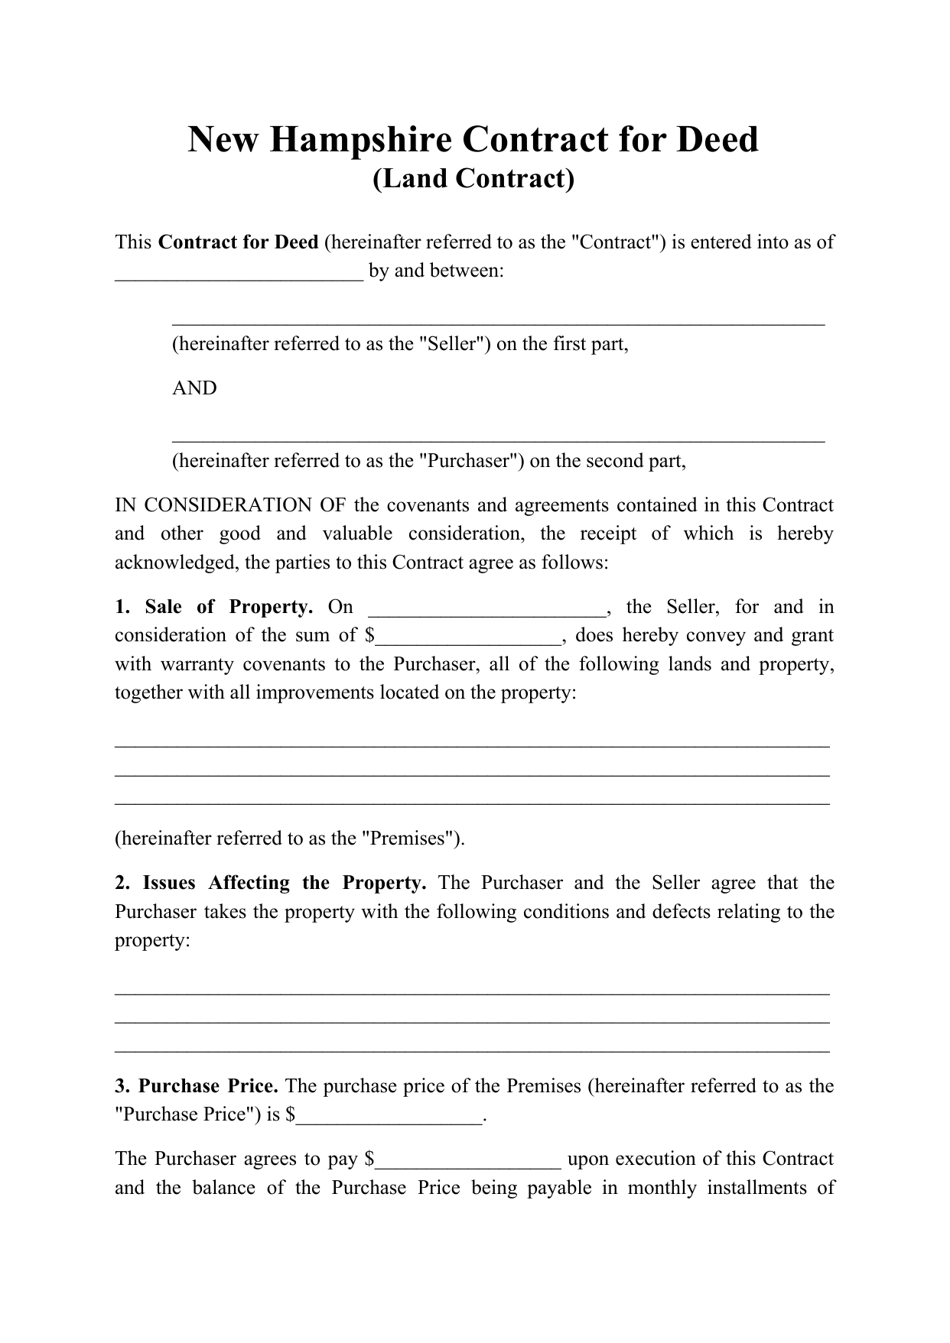 Contract for Deed (Land Contract) - New Hampshire, Page 1